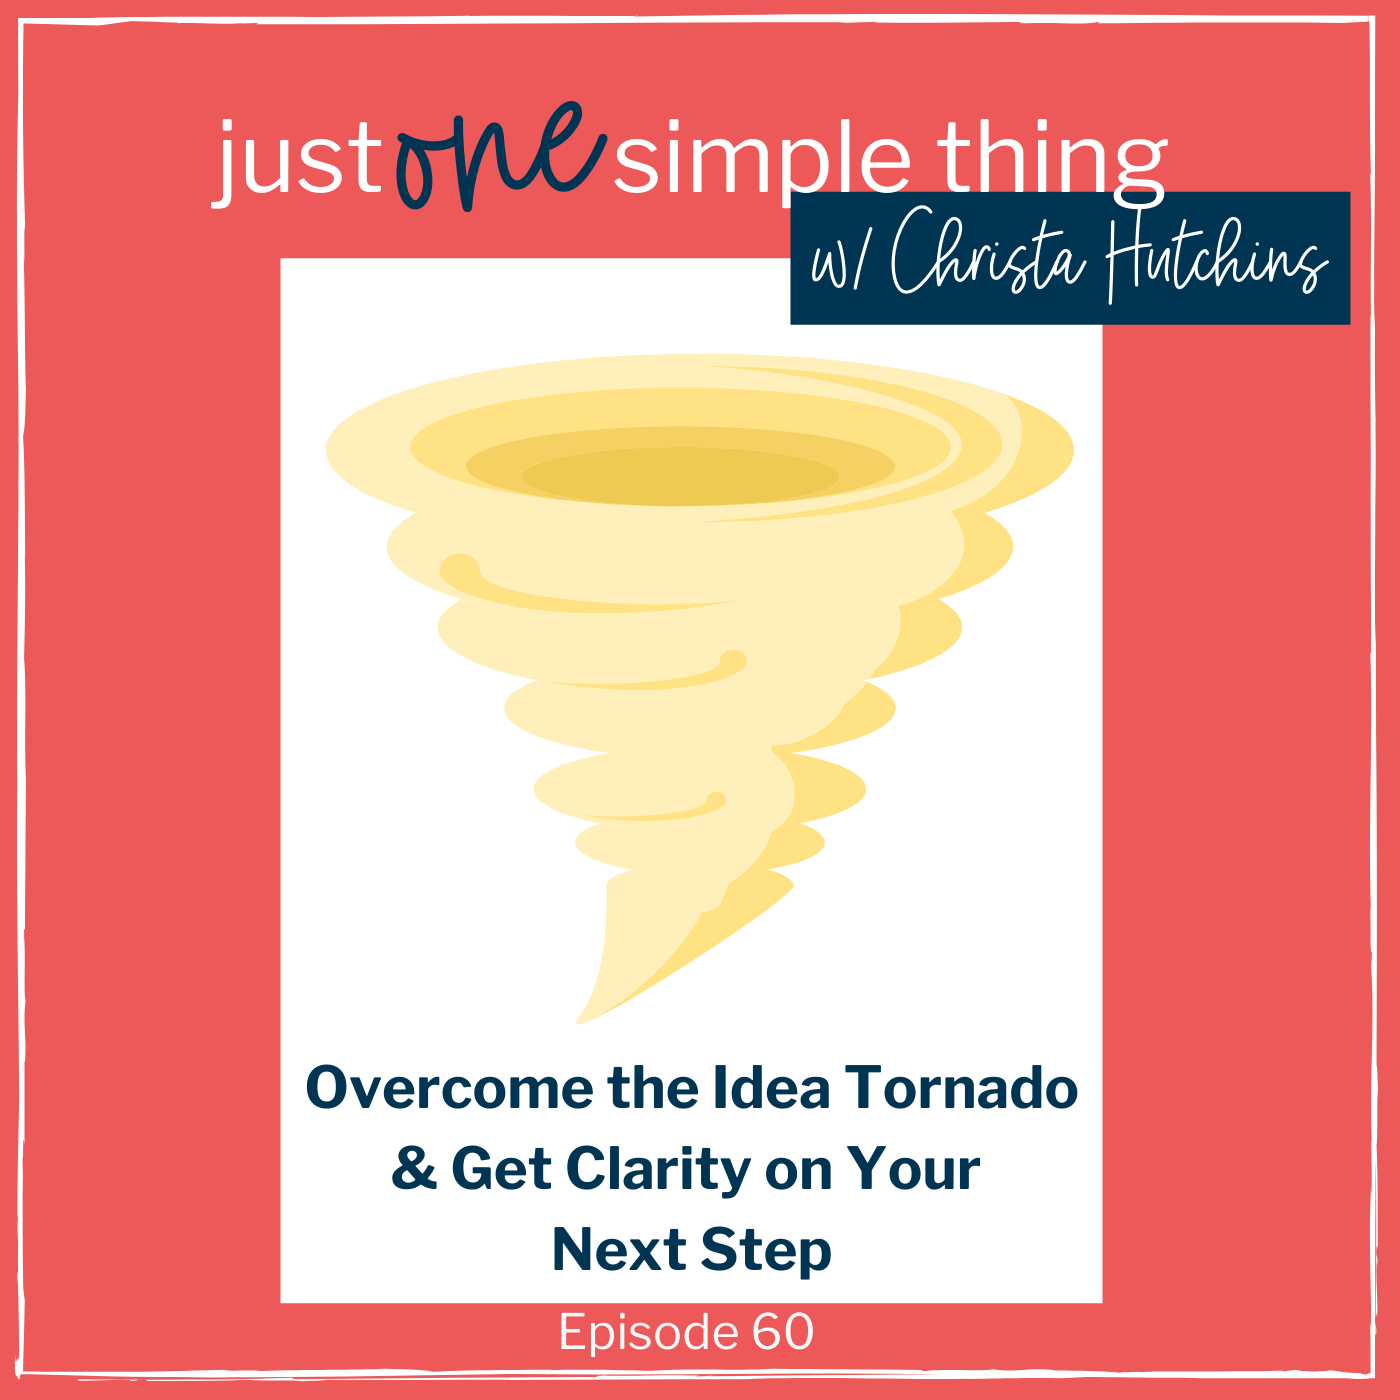 Overcome the Idea Tornado & Get Clarity on Your Next Step